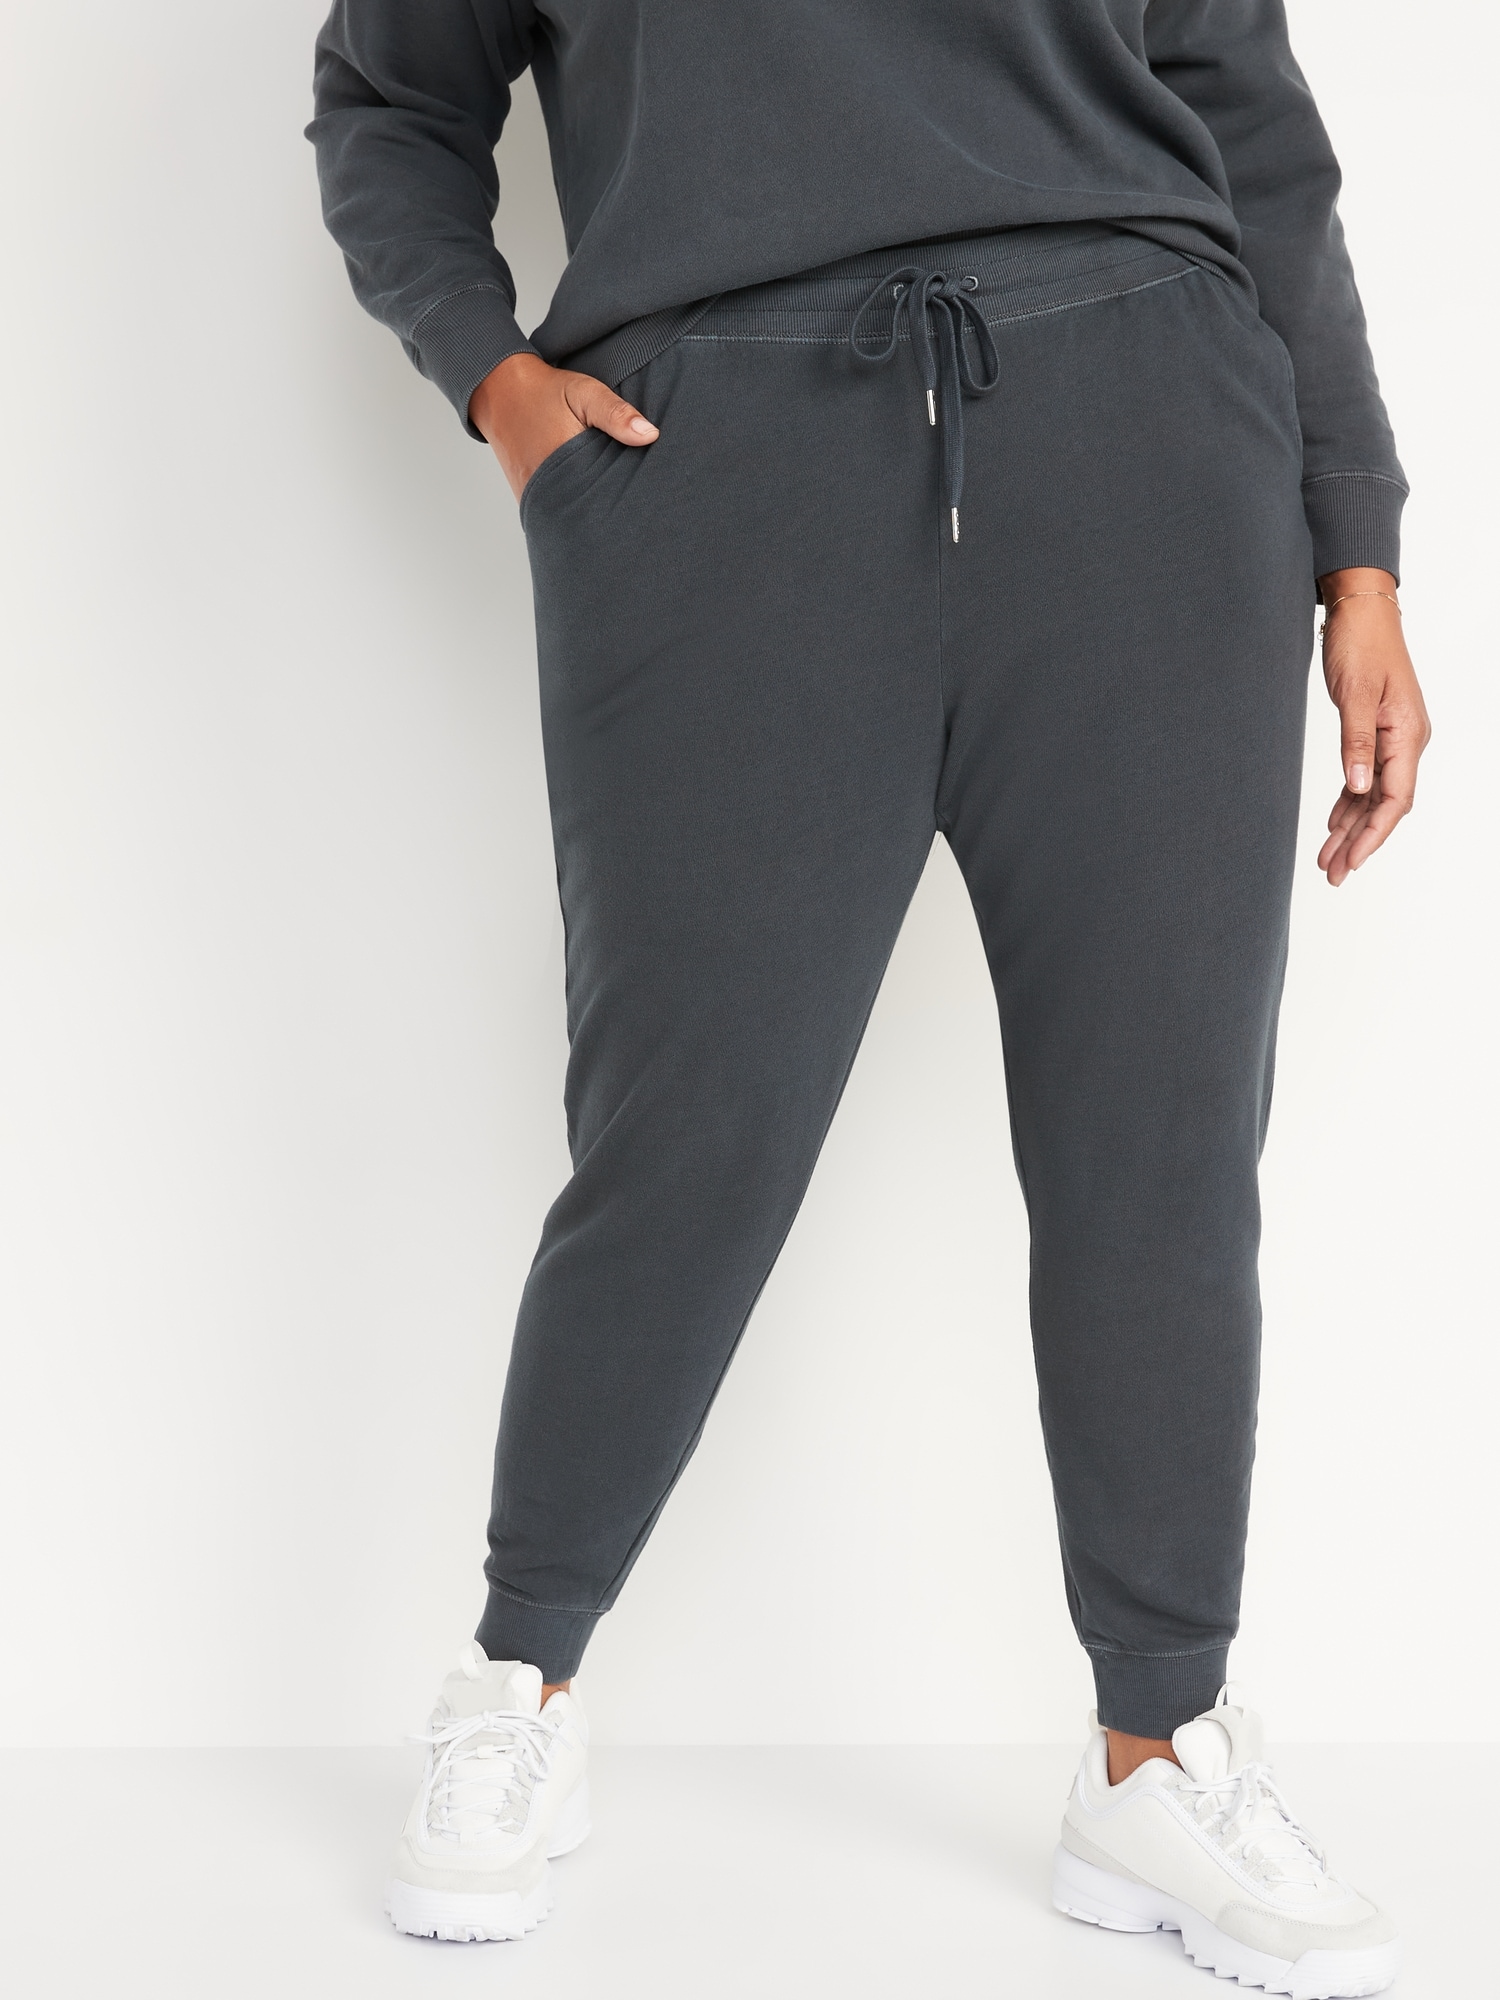 Old Navy Mid-Rise Vintage Street Jogger Sweatpants for Women - ShopStyle  Activewear Pants